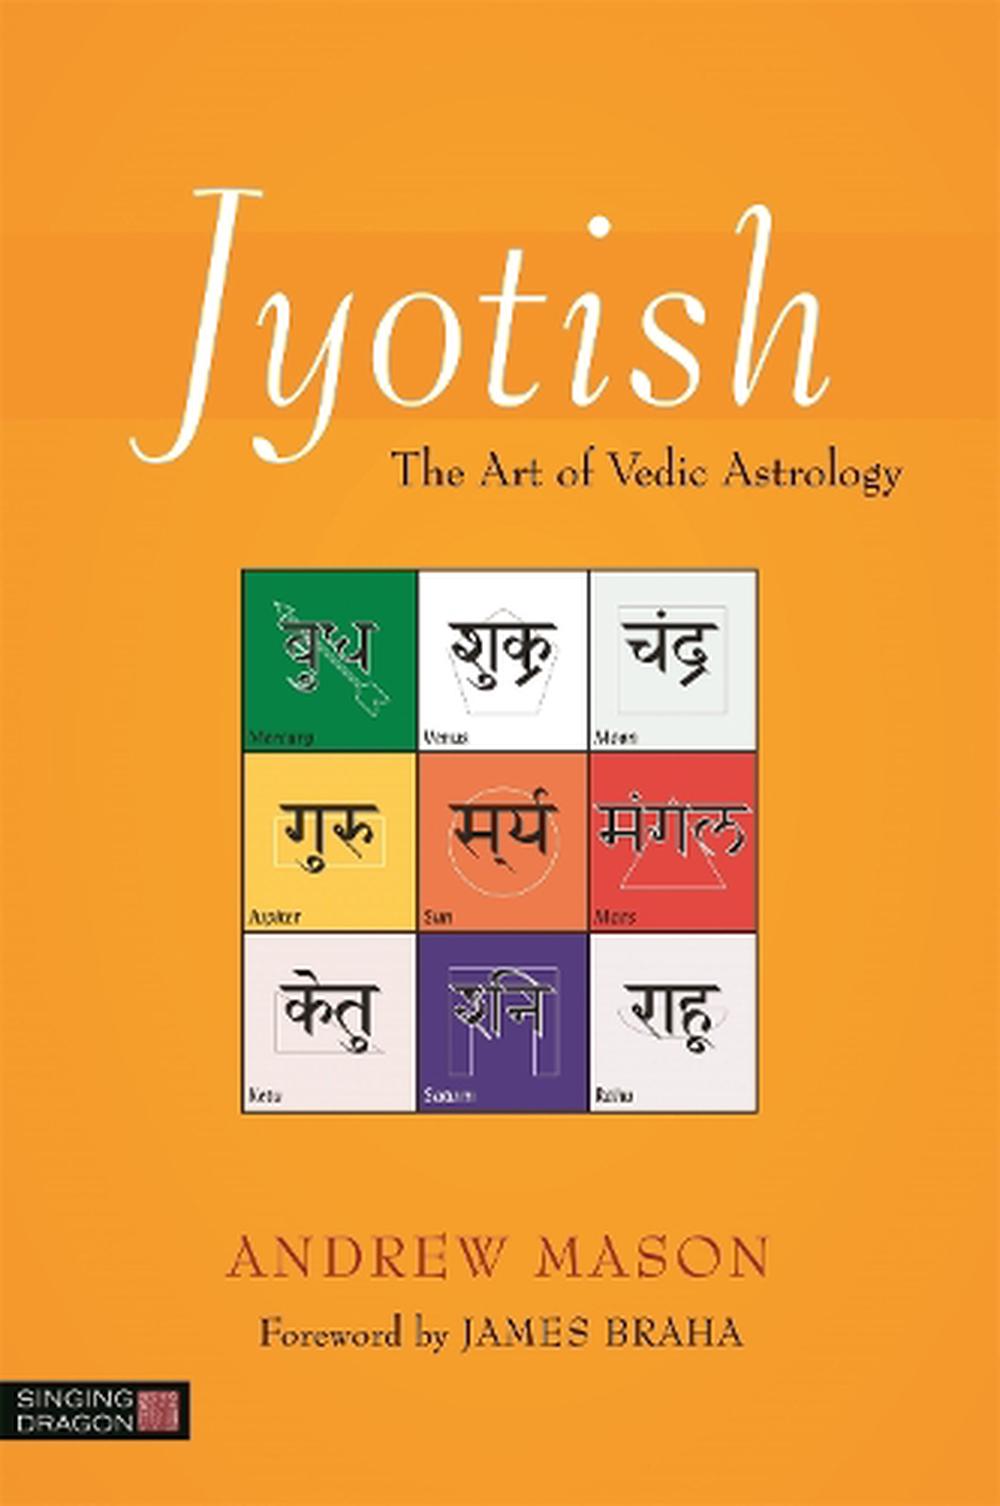 the art of vedic astrology